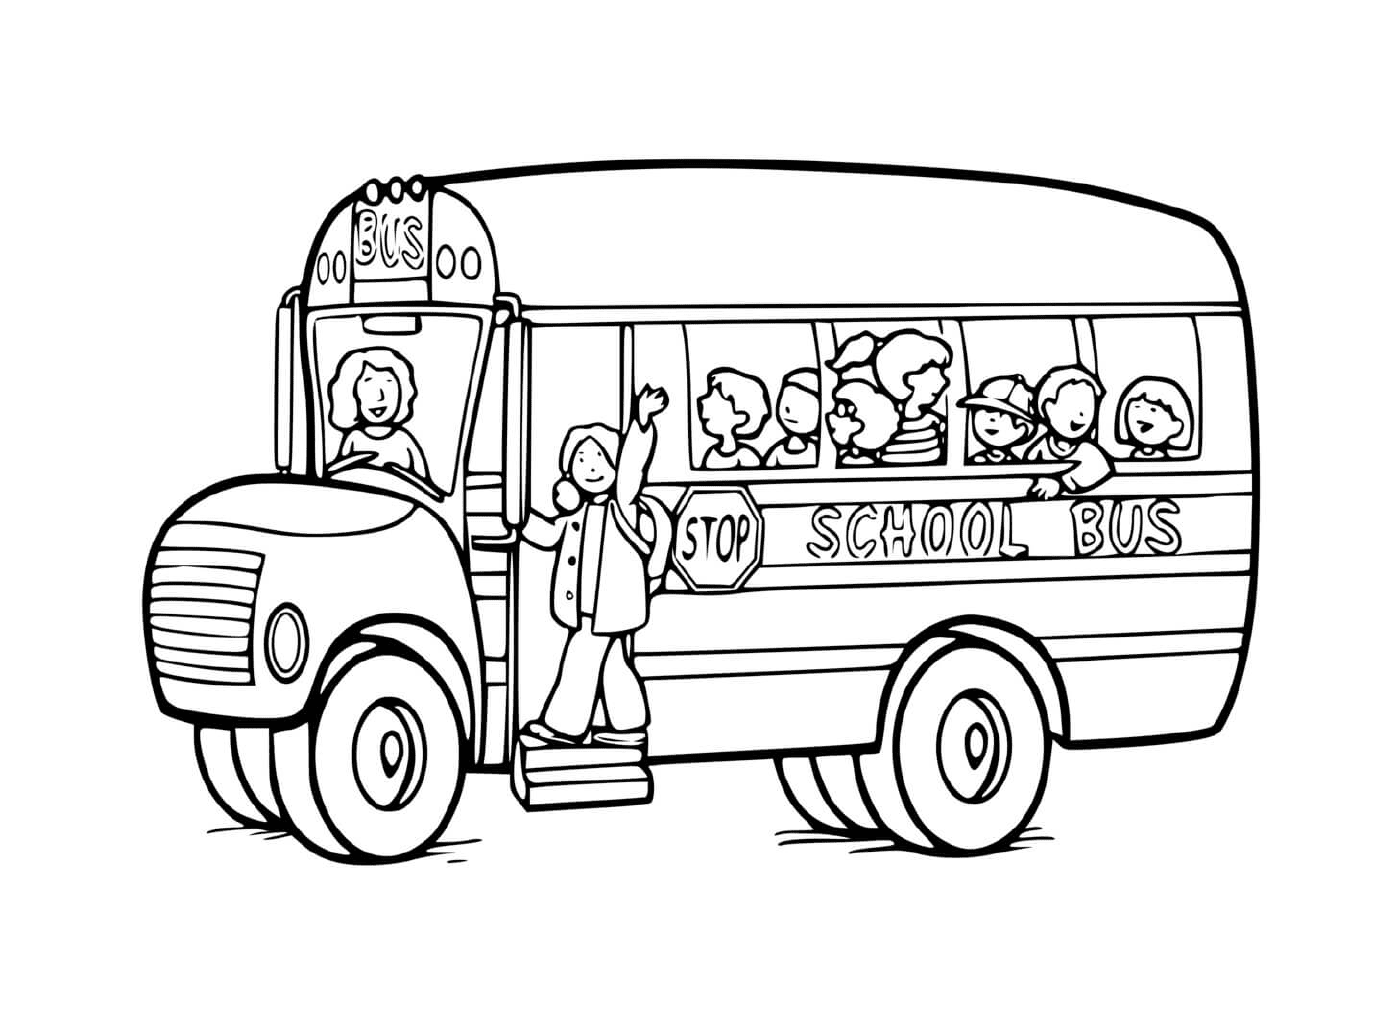  A means of school transportation: the bus 